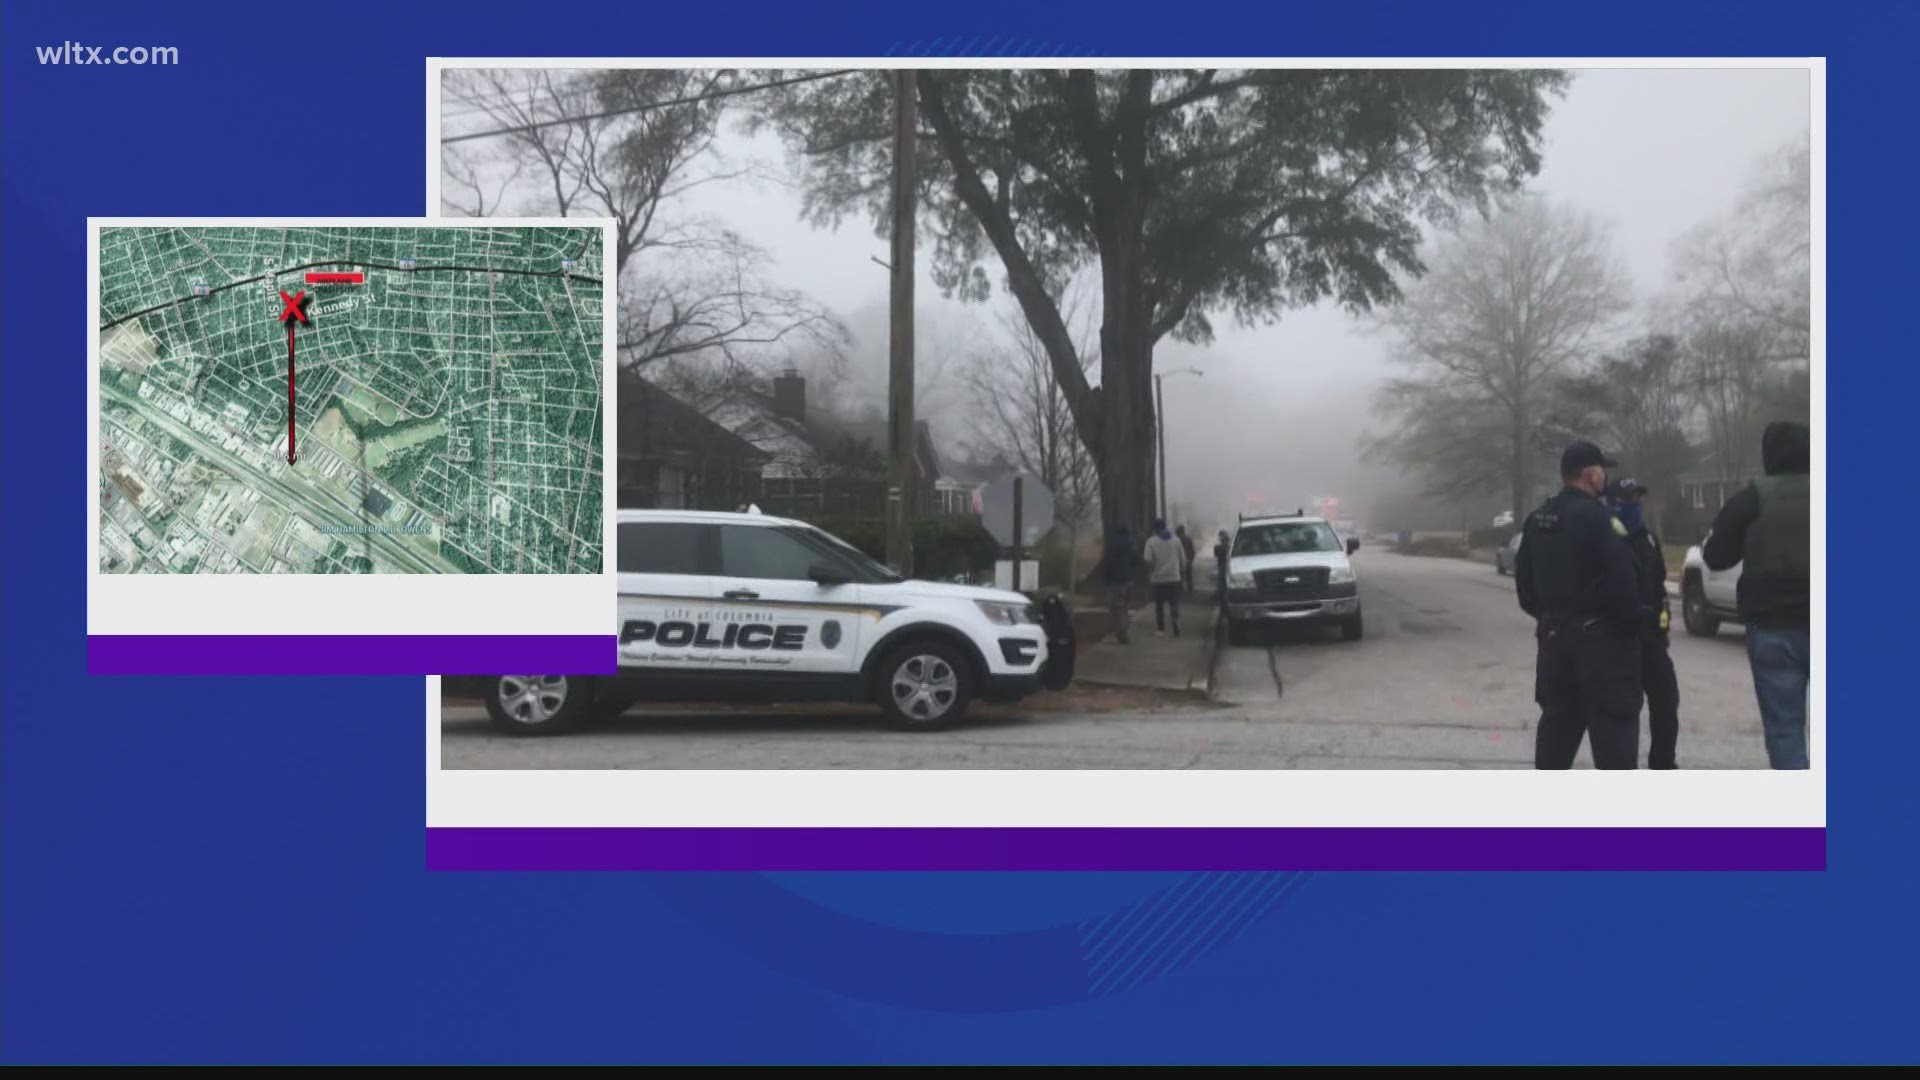 A small plane crashed into a home in the Rosewood neighborhood, the weather at the time was dense fog-WLTX meteorologist Efran Efante explains.